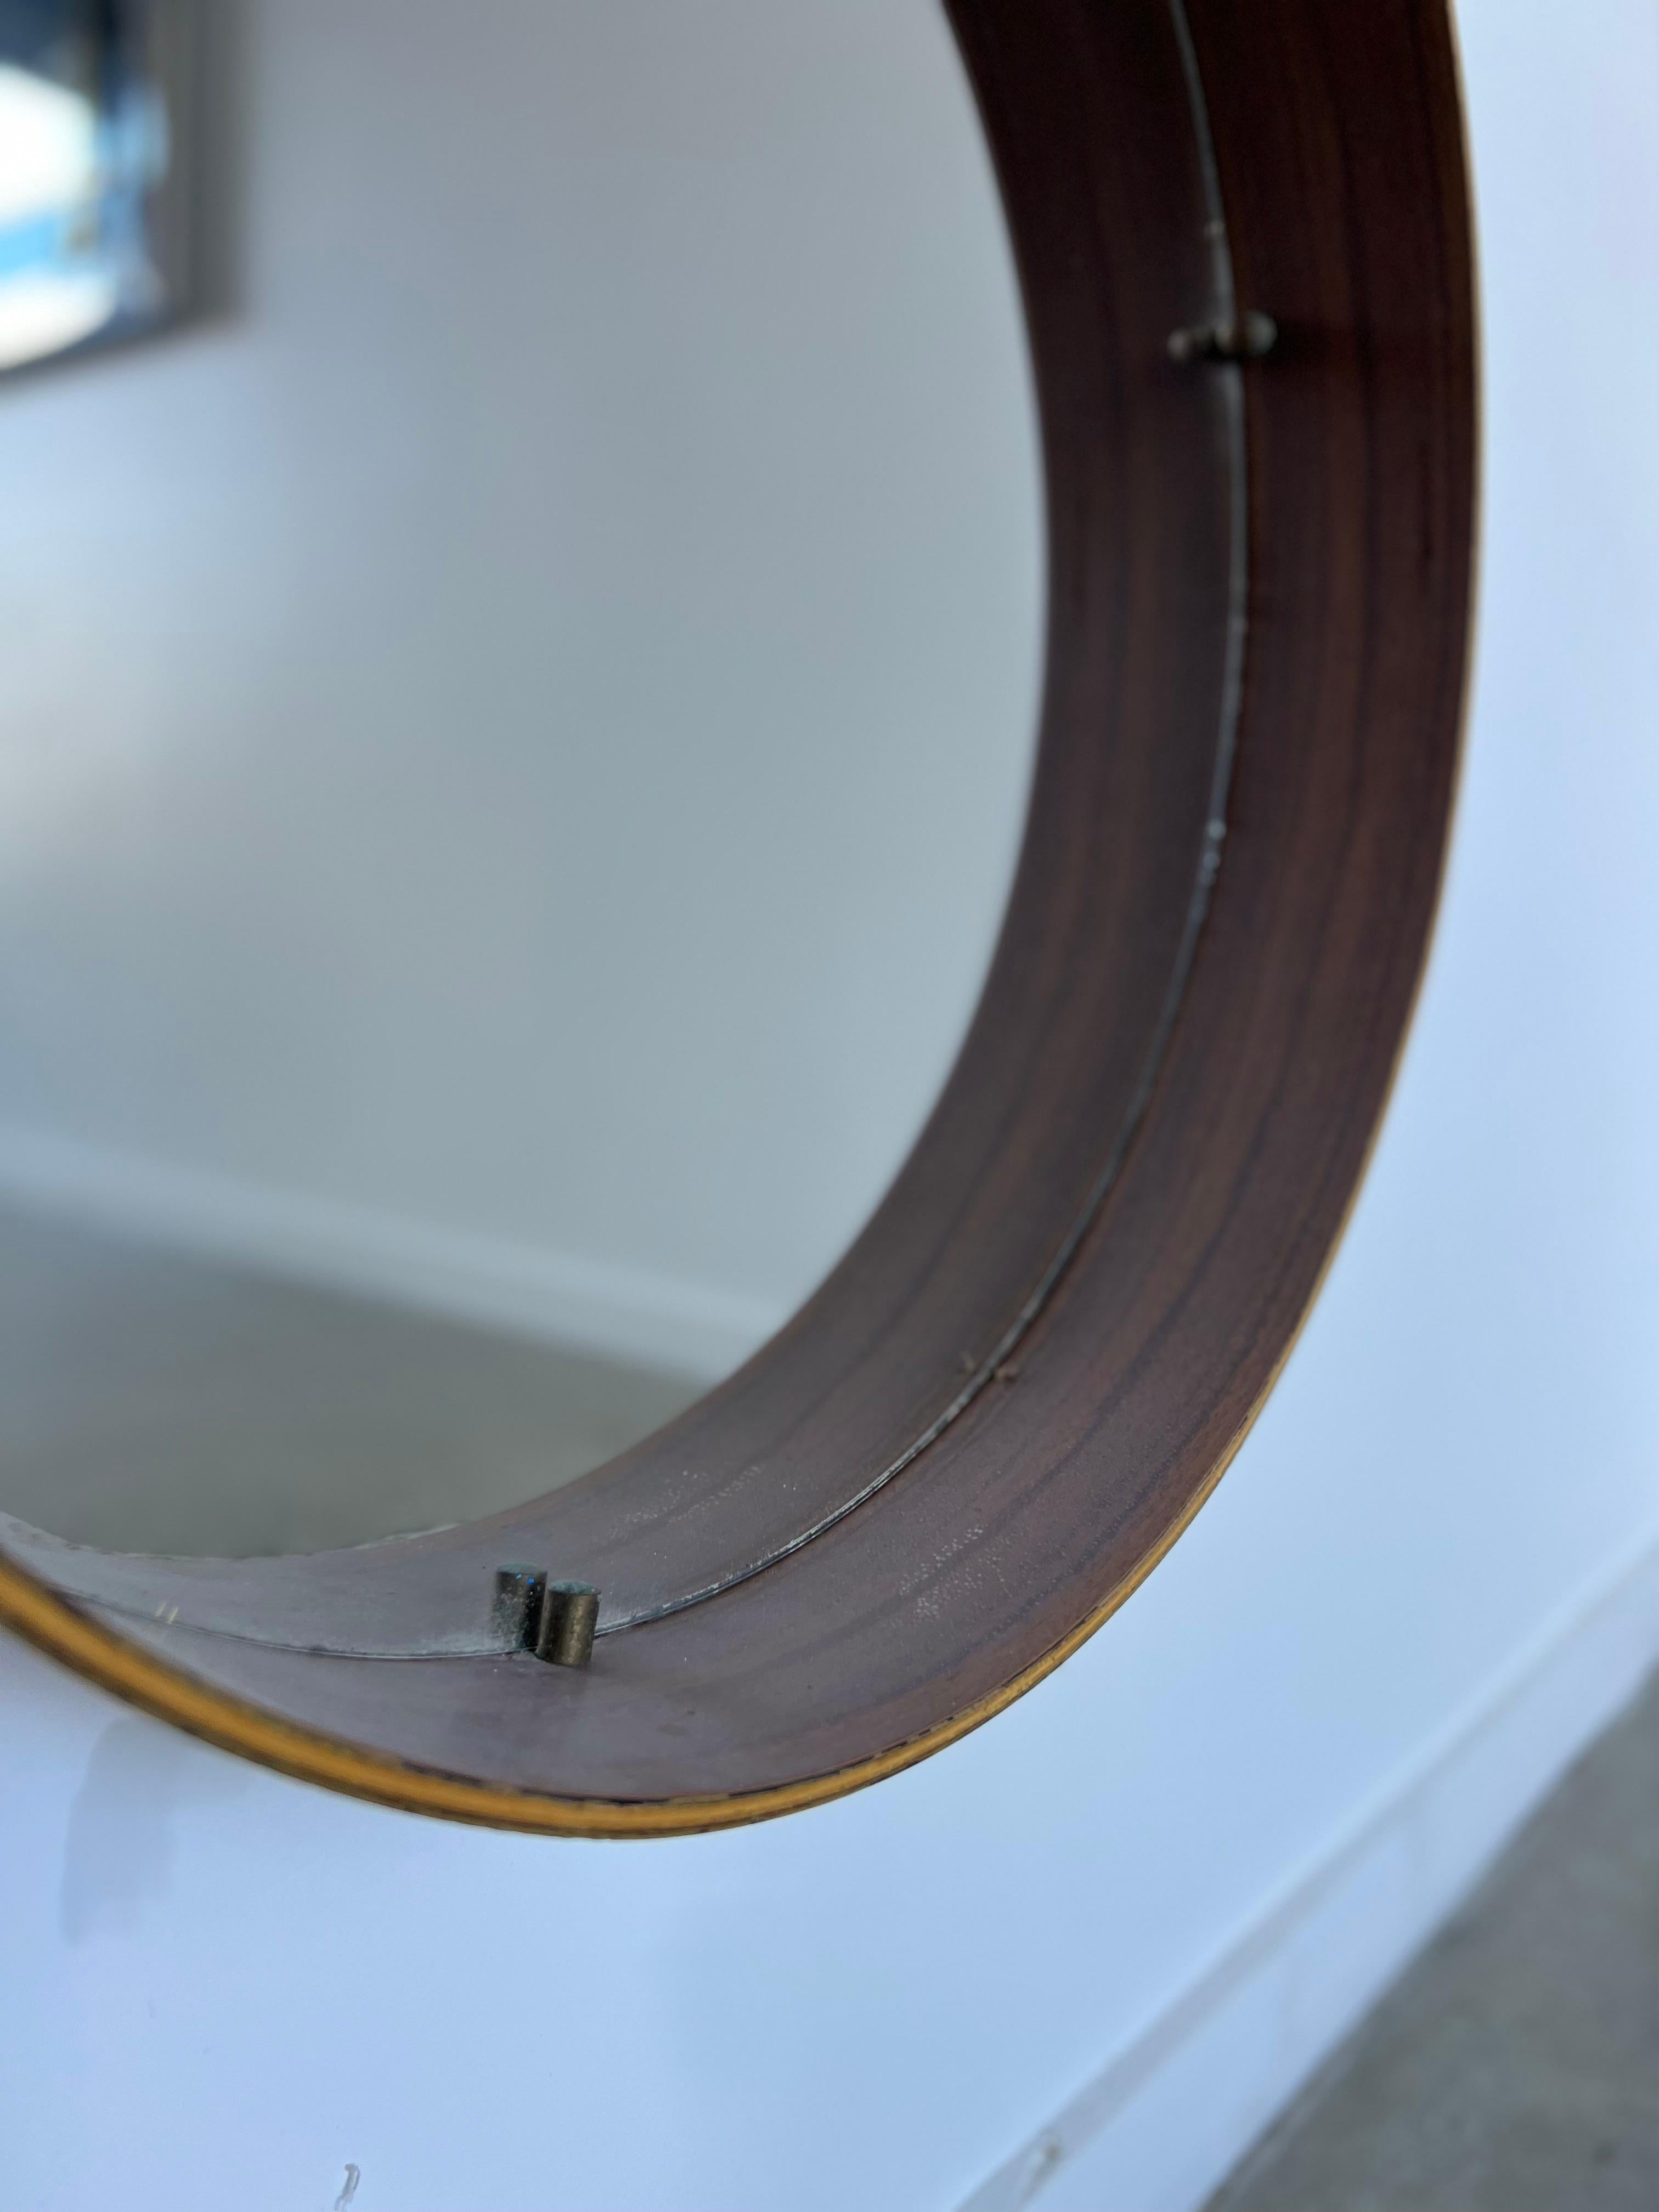 1950s Italian round mirror with rosewood frame.
Very stylish round Italian mirror made in timber, still in very good condition, original mirror glass.